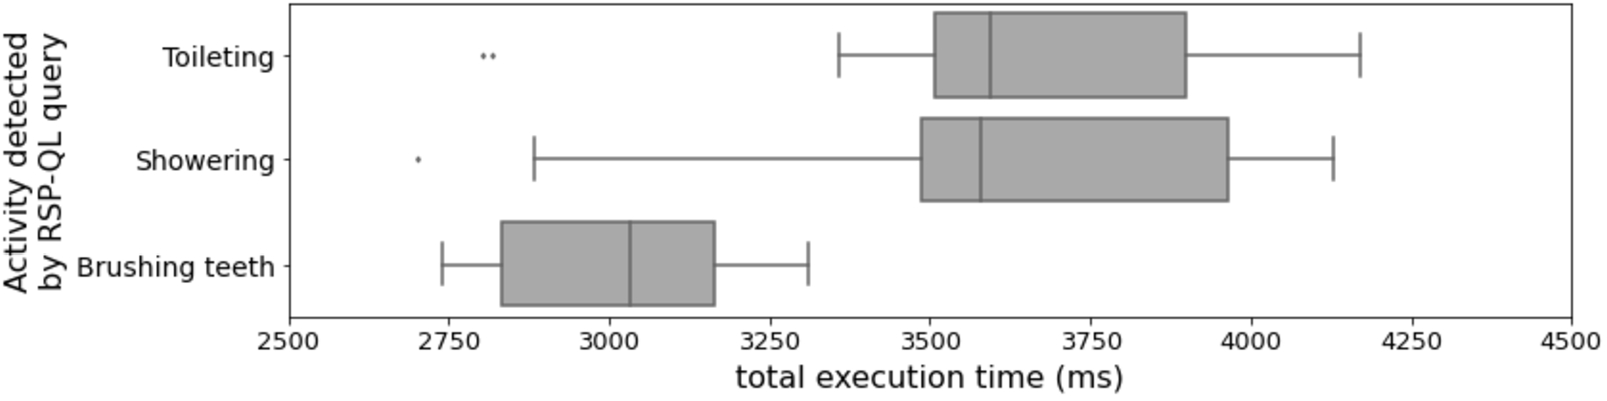 Results of evaluating the DIVIDE real-time query evaluation approach with the C-SPARQL baseline set-up (1), on a Raspberry Pi 3, Model B. The results show the total execution time distribution over the engine’s runtime and multiple runs, for the toileting, showering and brushing teeth DIVIDE queries.